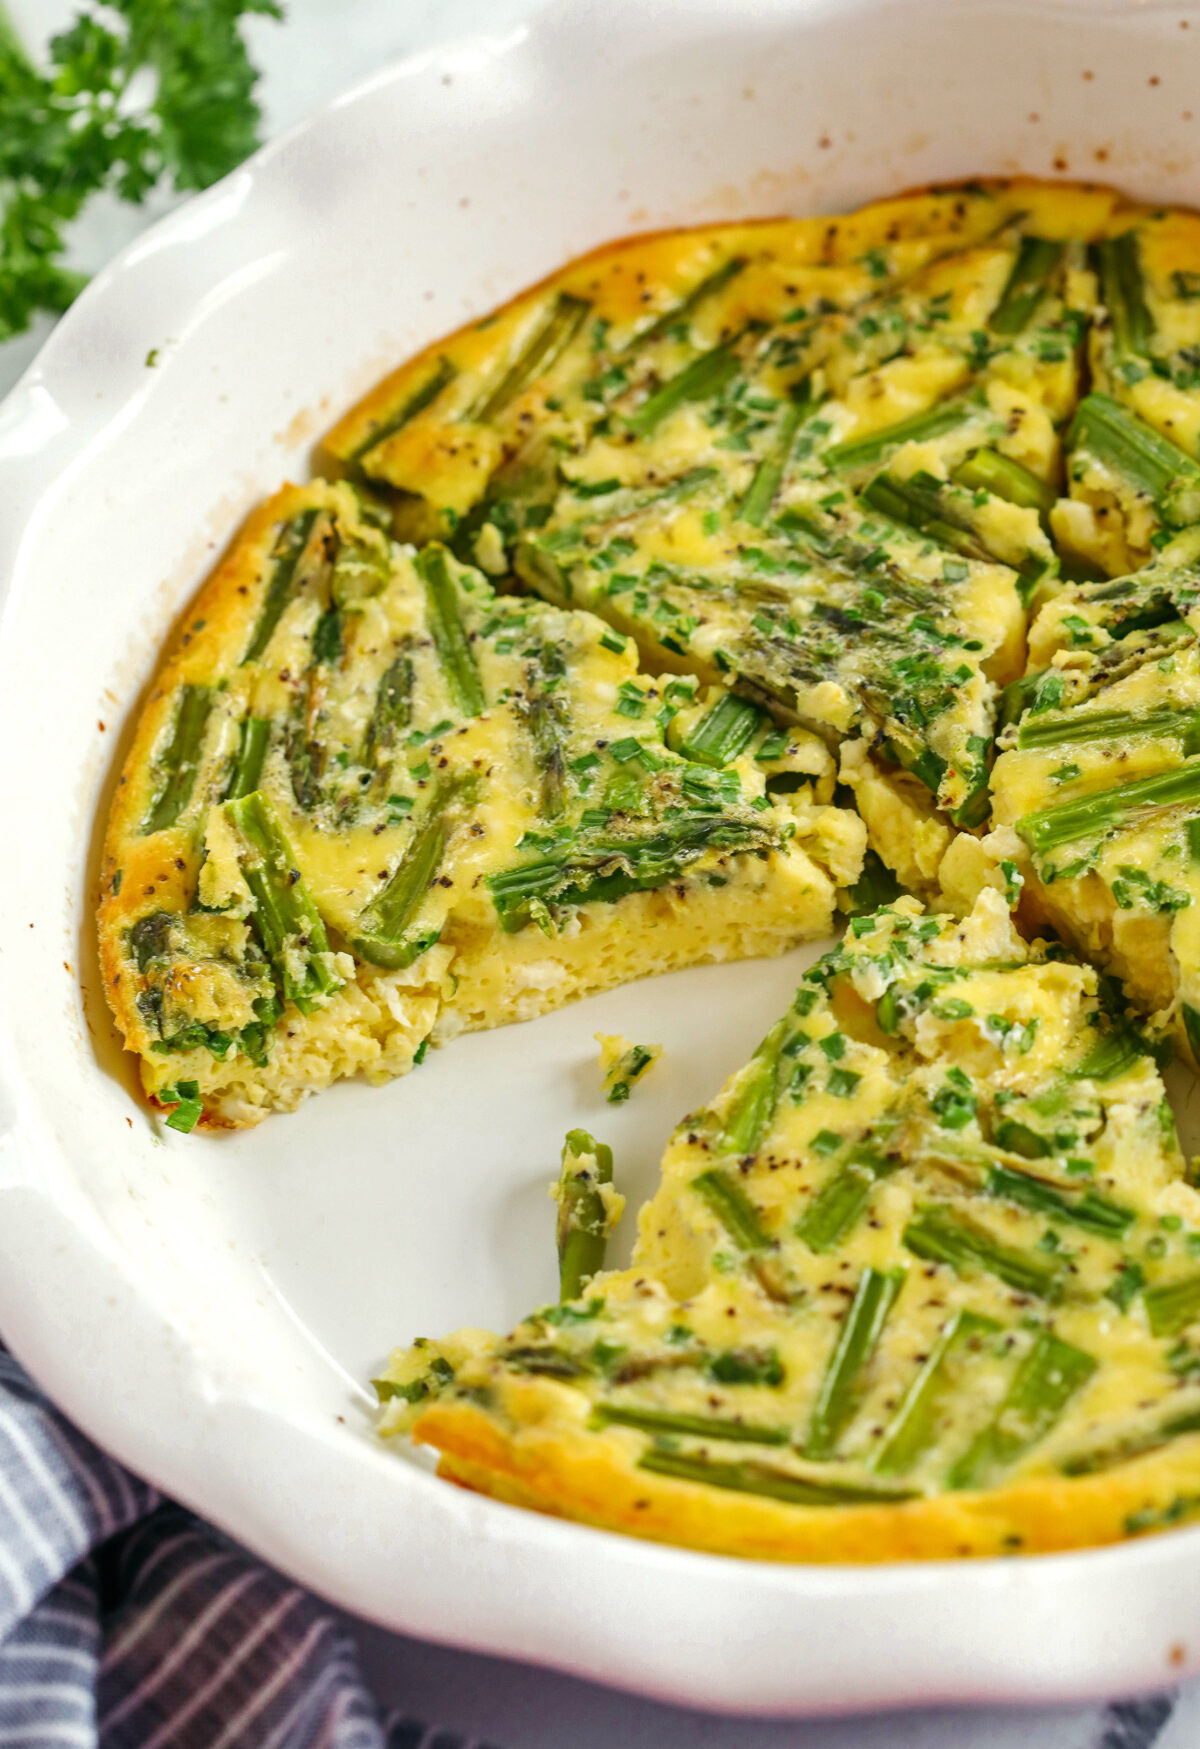 This healthy Asparagus and Feta Crustless Quiche is easily made with just a few simple ingredients, tastes delicious and makes the perfect low-carb dish you can enjoy for any meal!